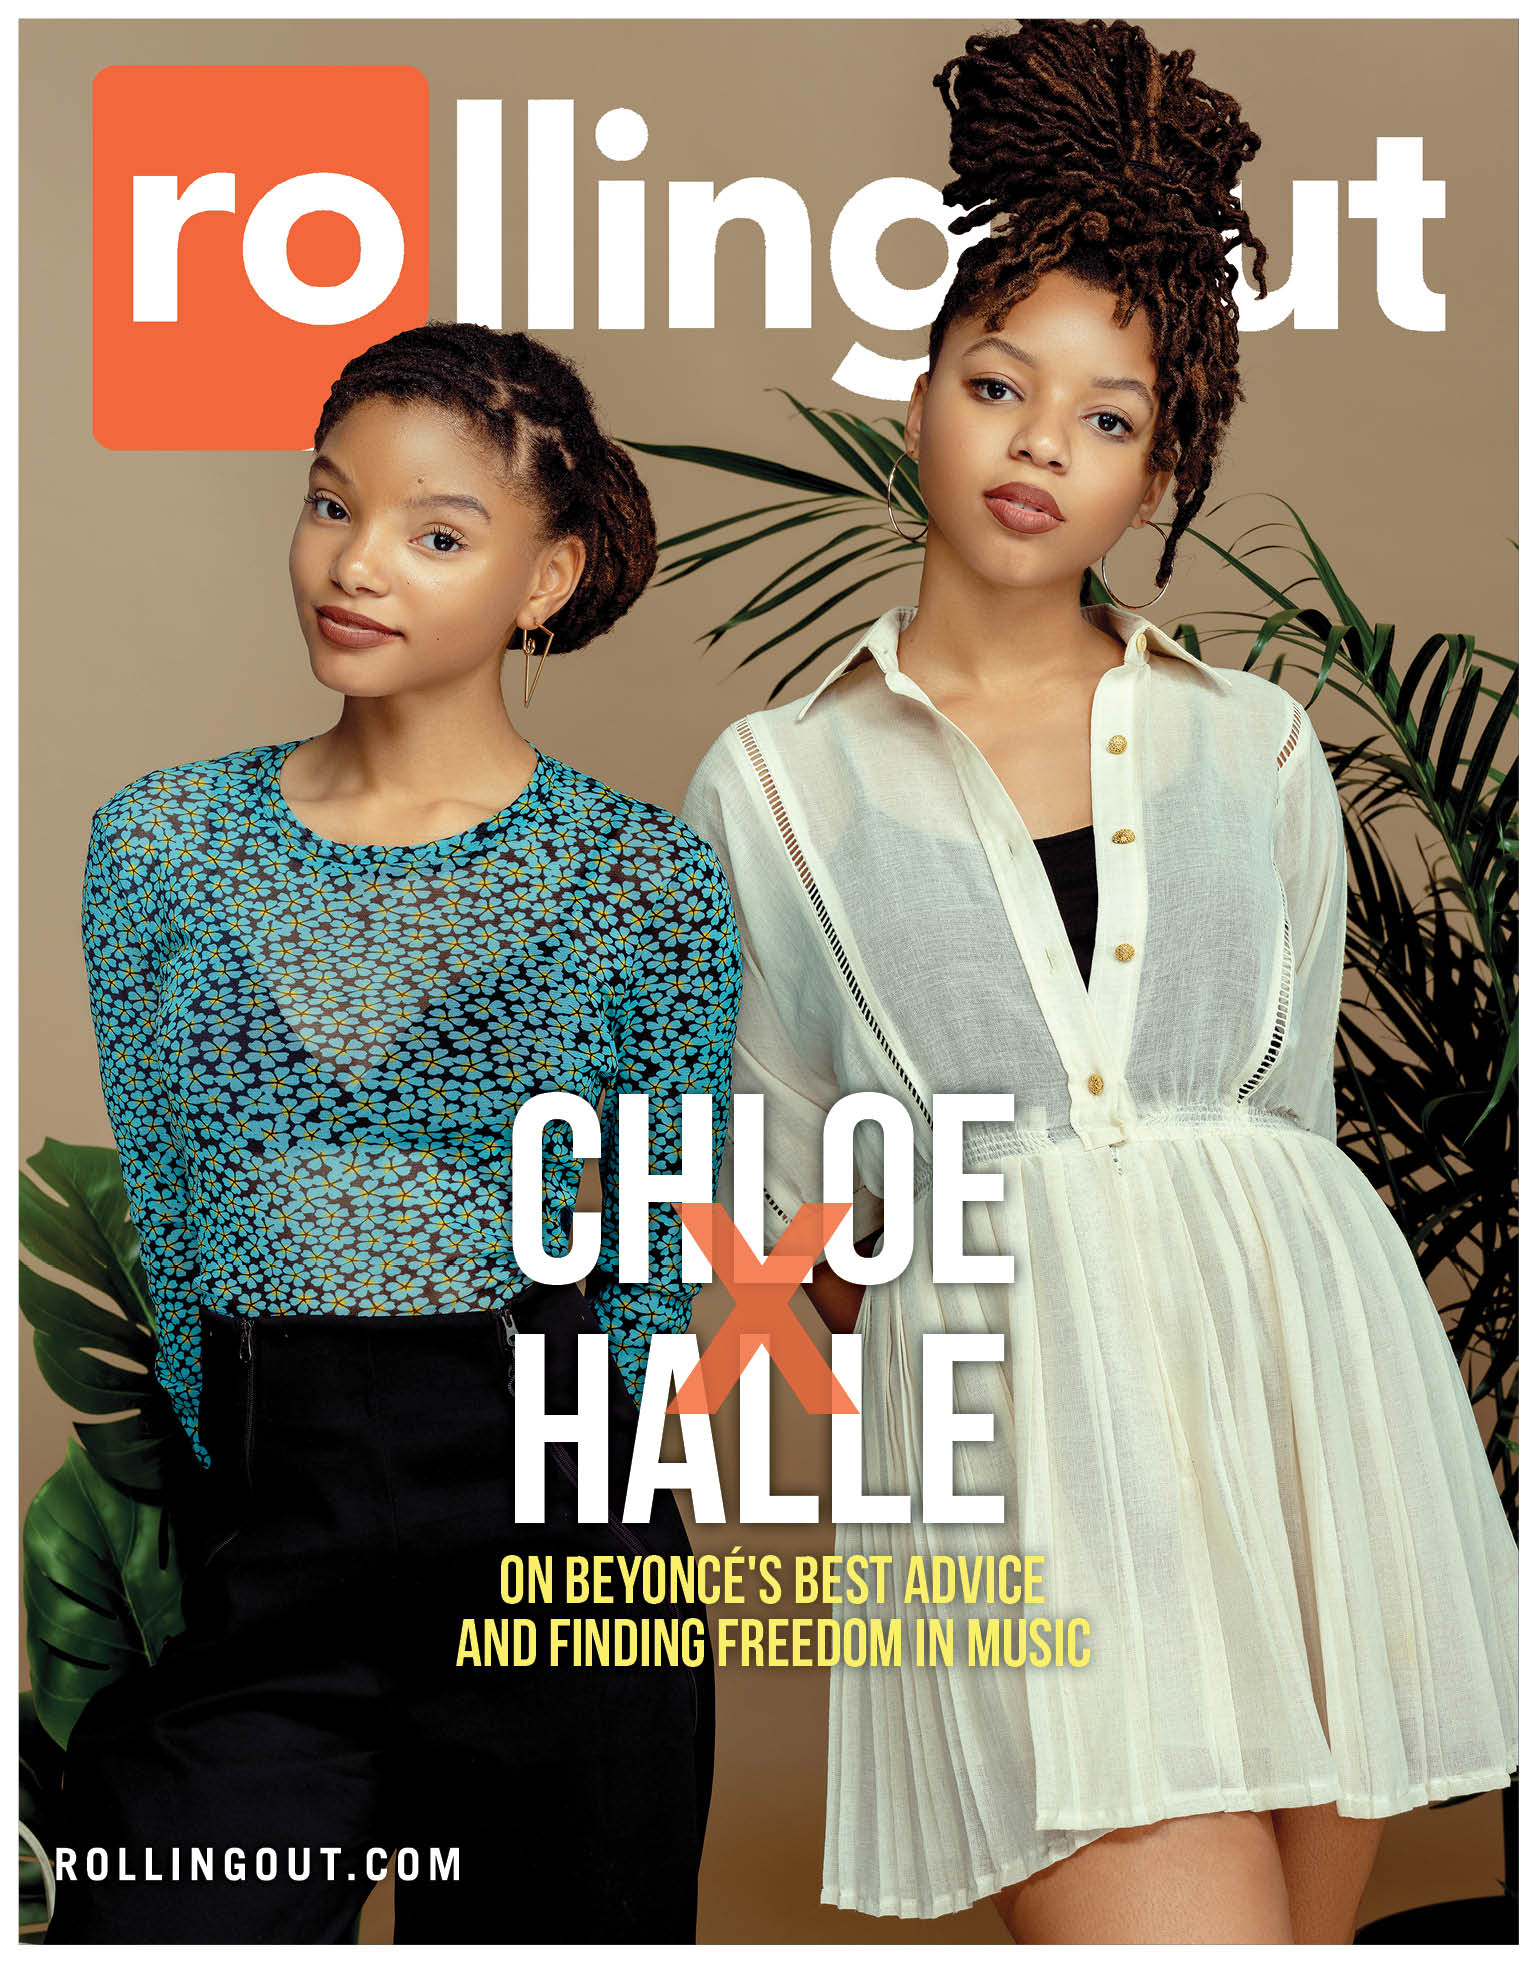 Chloe X Halle on Beyoncé's best advice and finding freedom in music